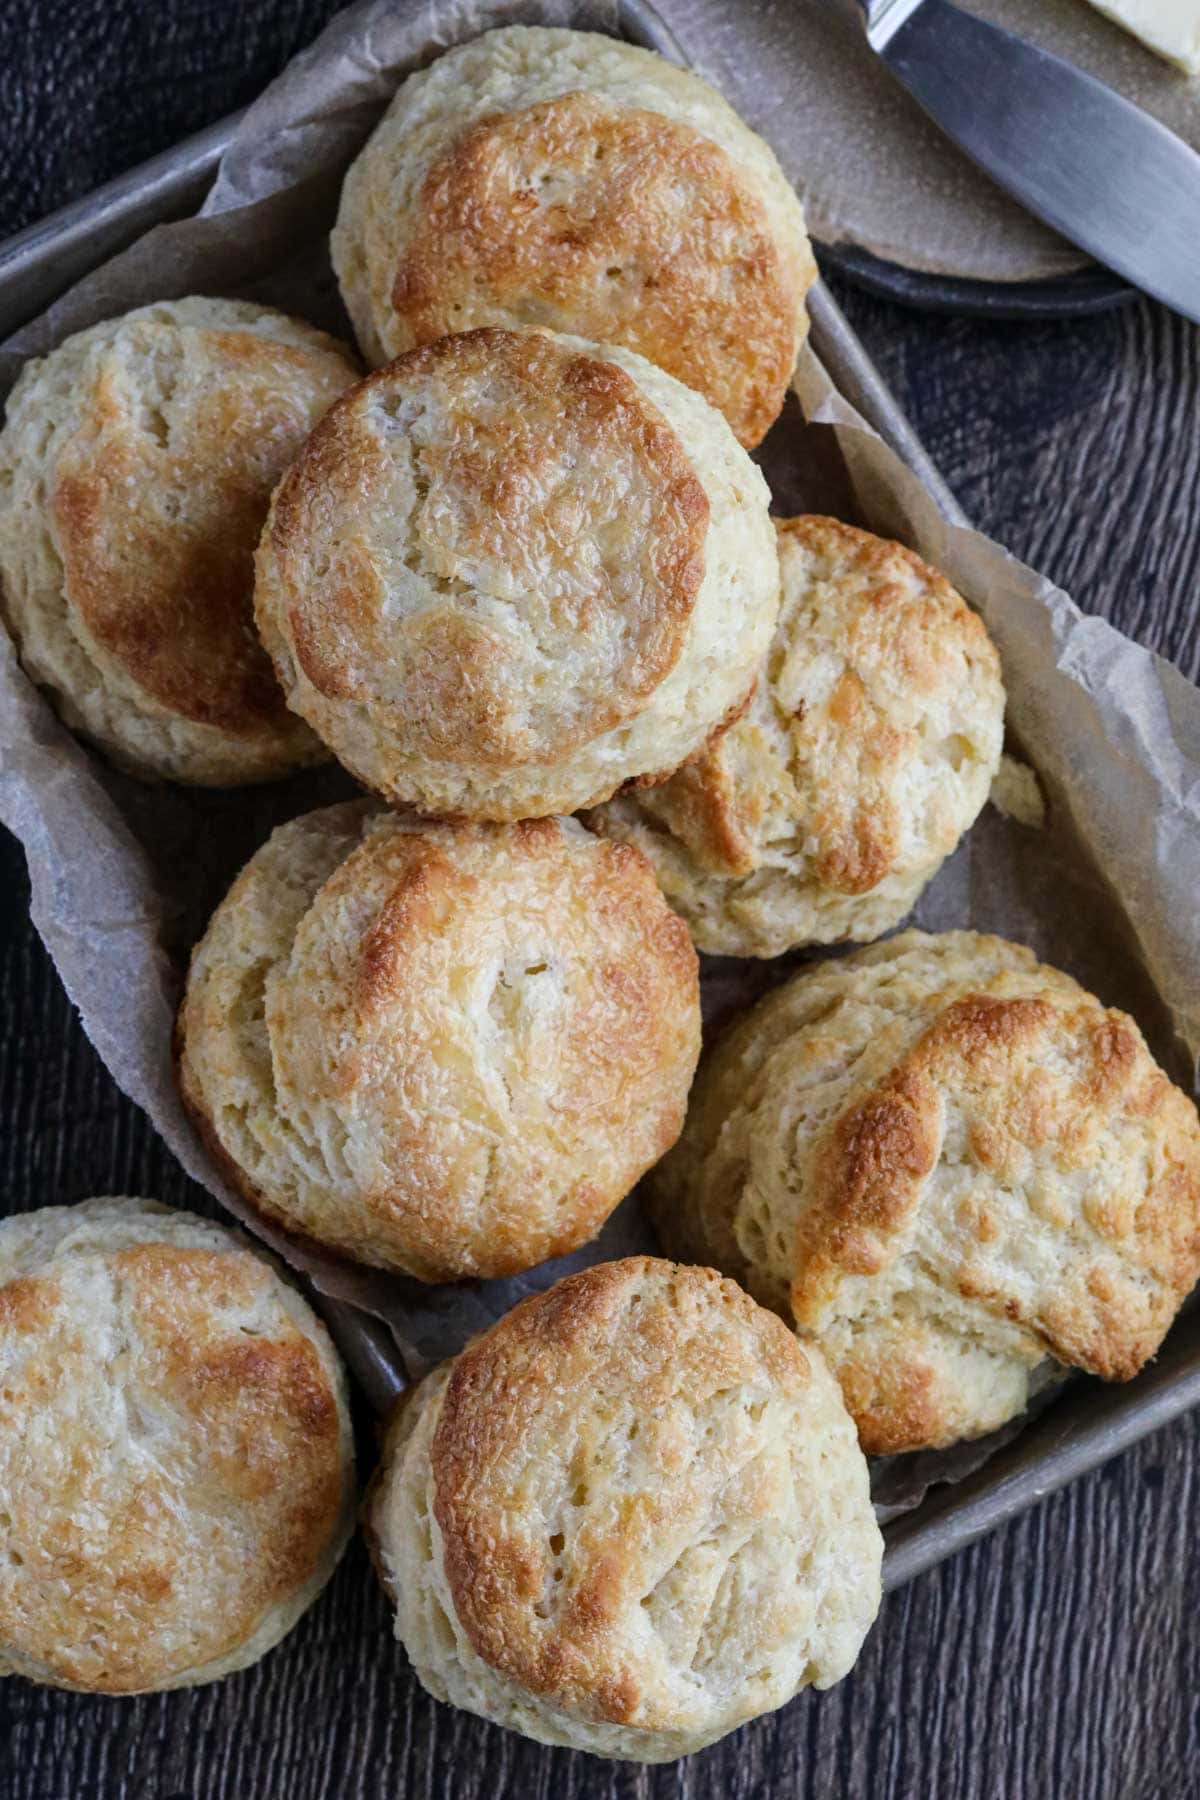 Southern buttermilk biscuits in a baking tray.